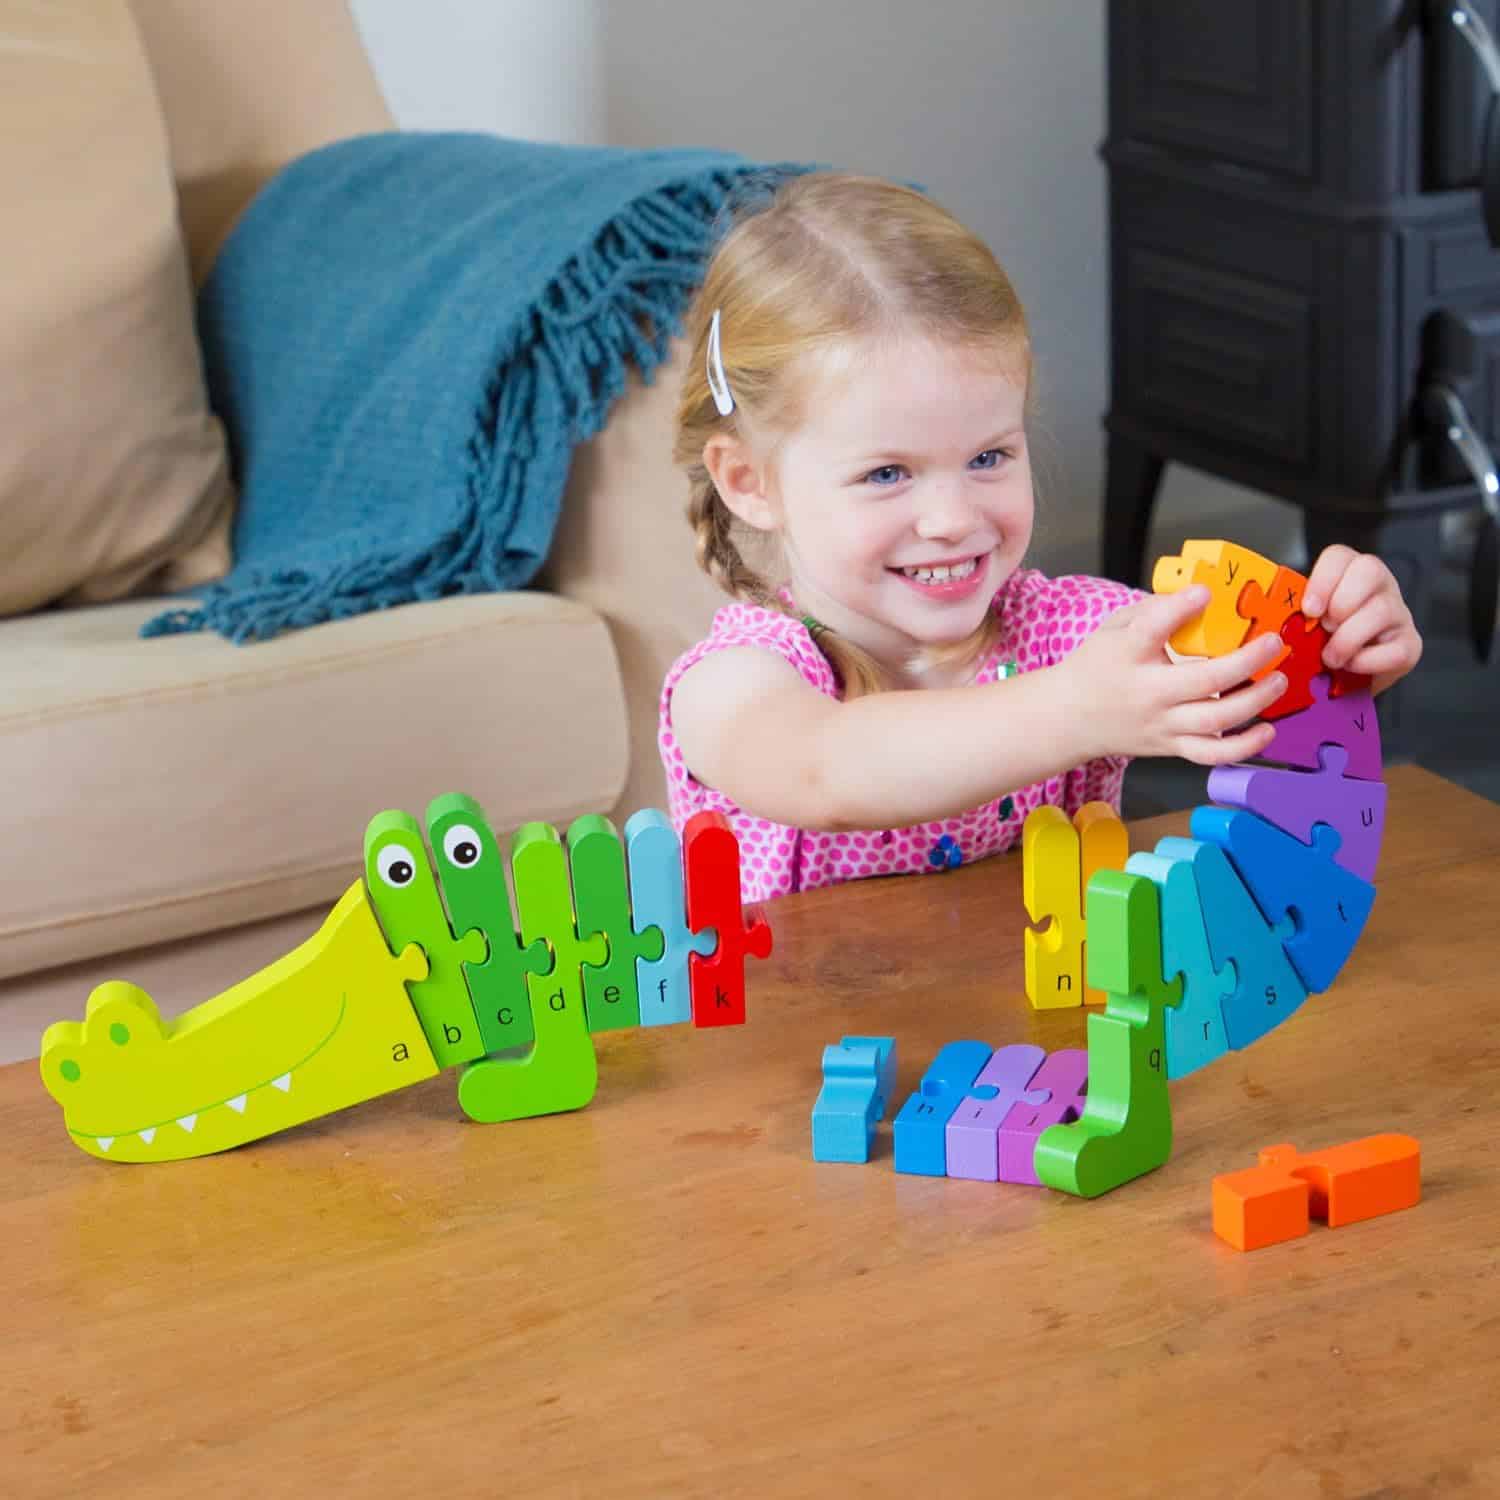 Review: New Classic Toys Alphabet Puzzle Crocodile - A Fun and Educational Wooden Toy for Toddlers